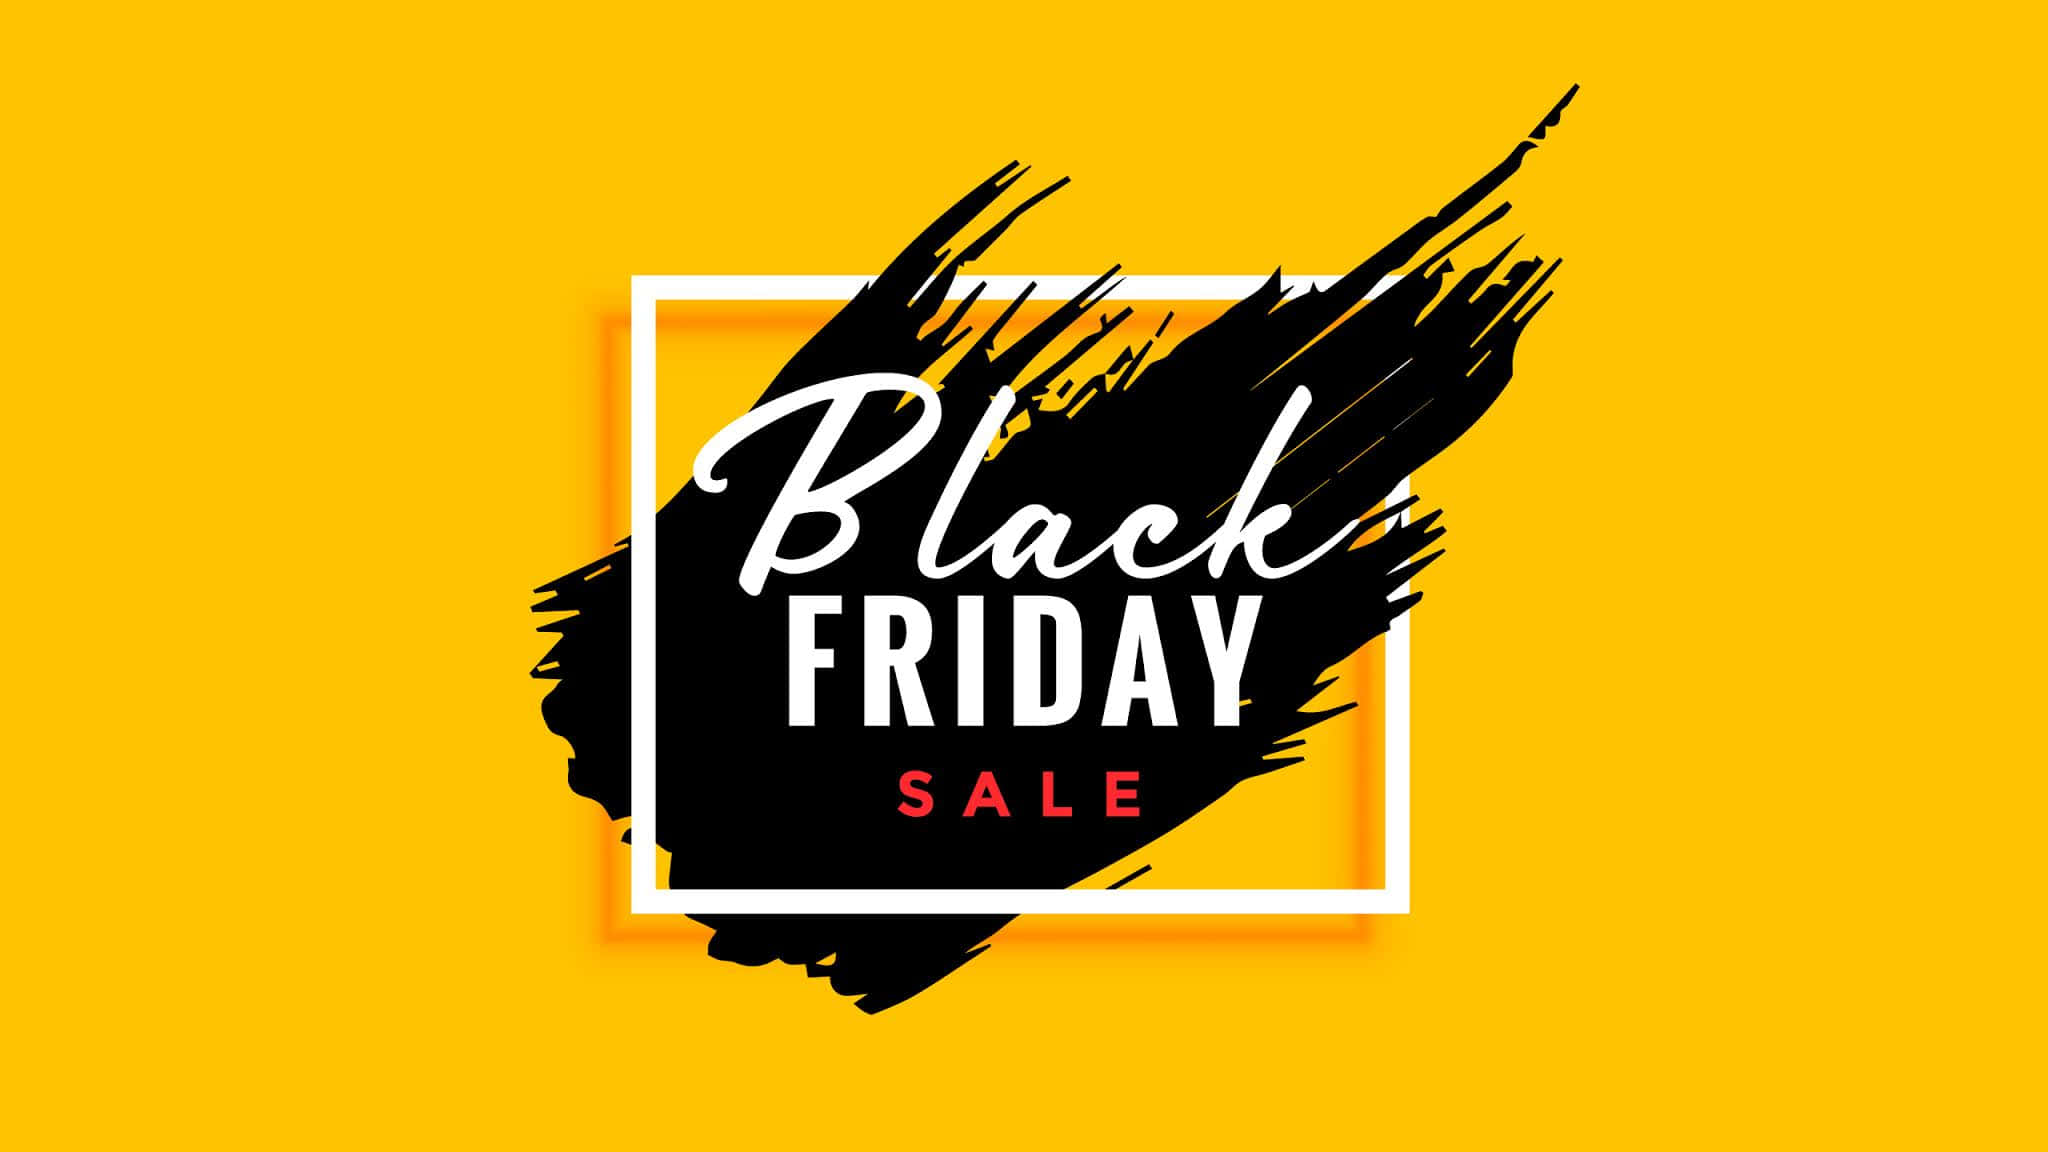 Black Friday Sale Banner With Brush Strokes On Yellow Background